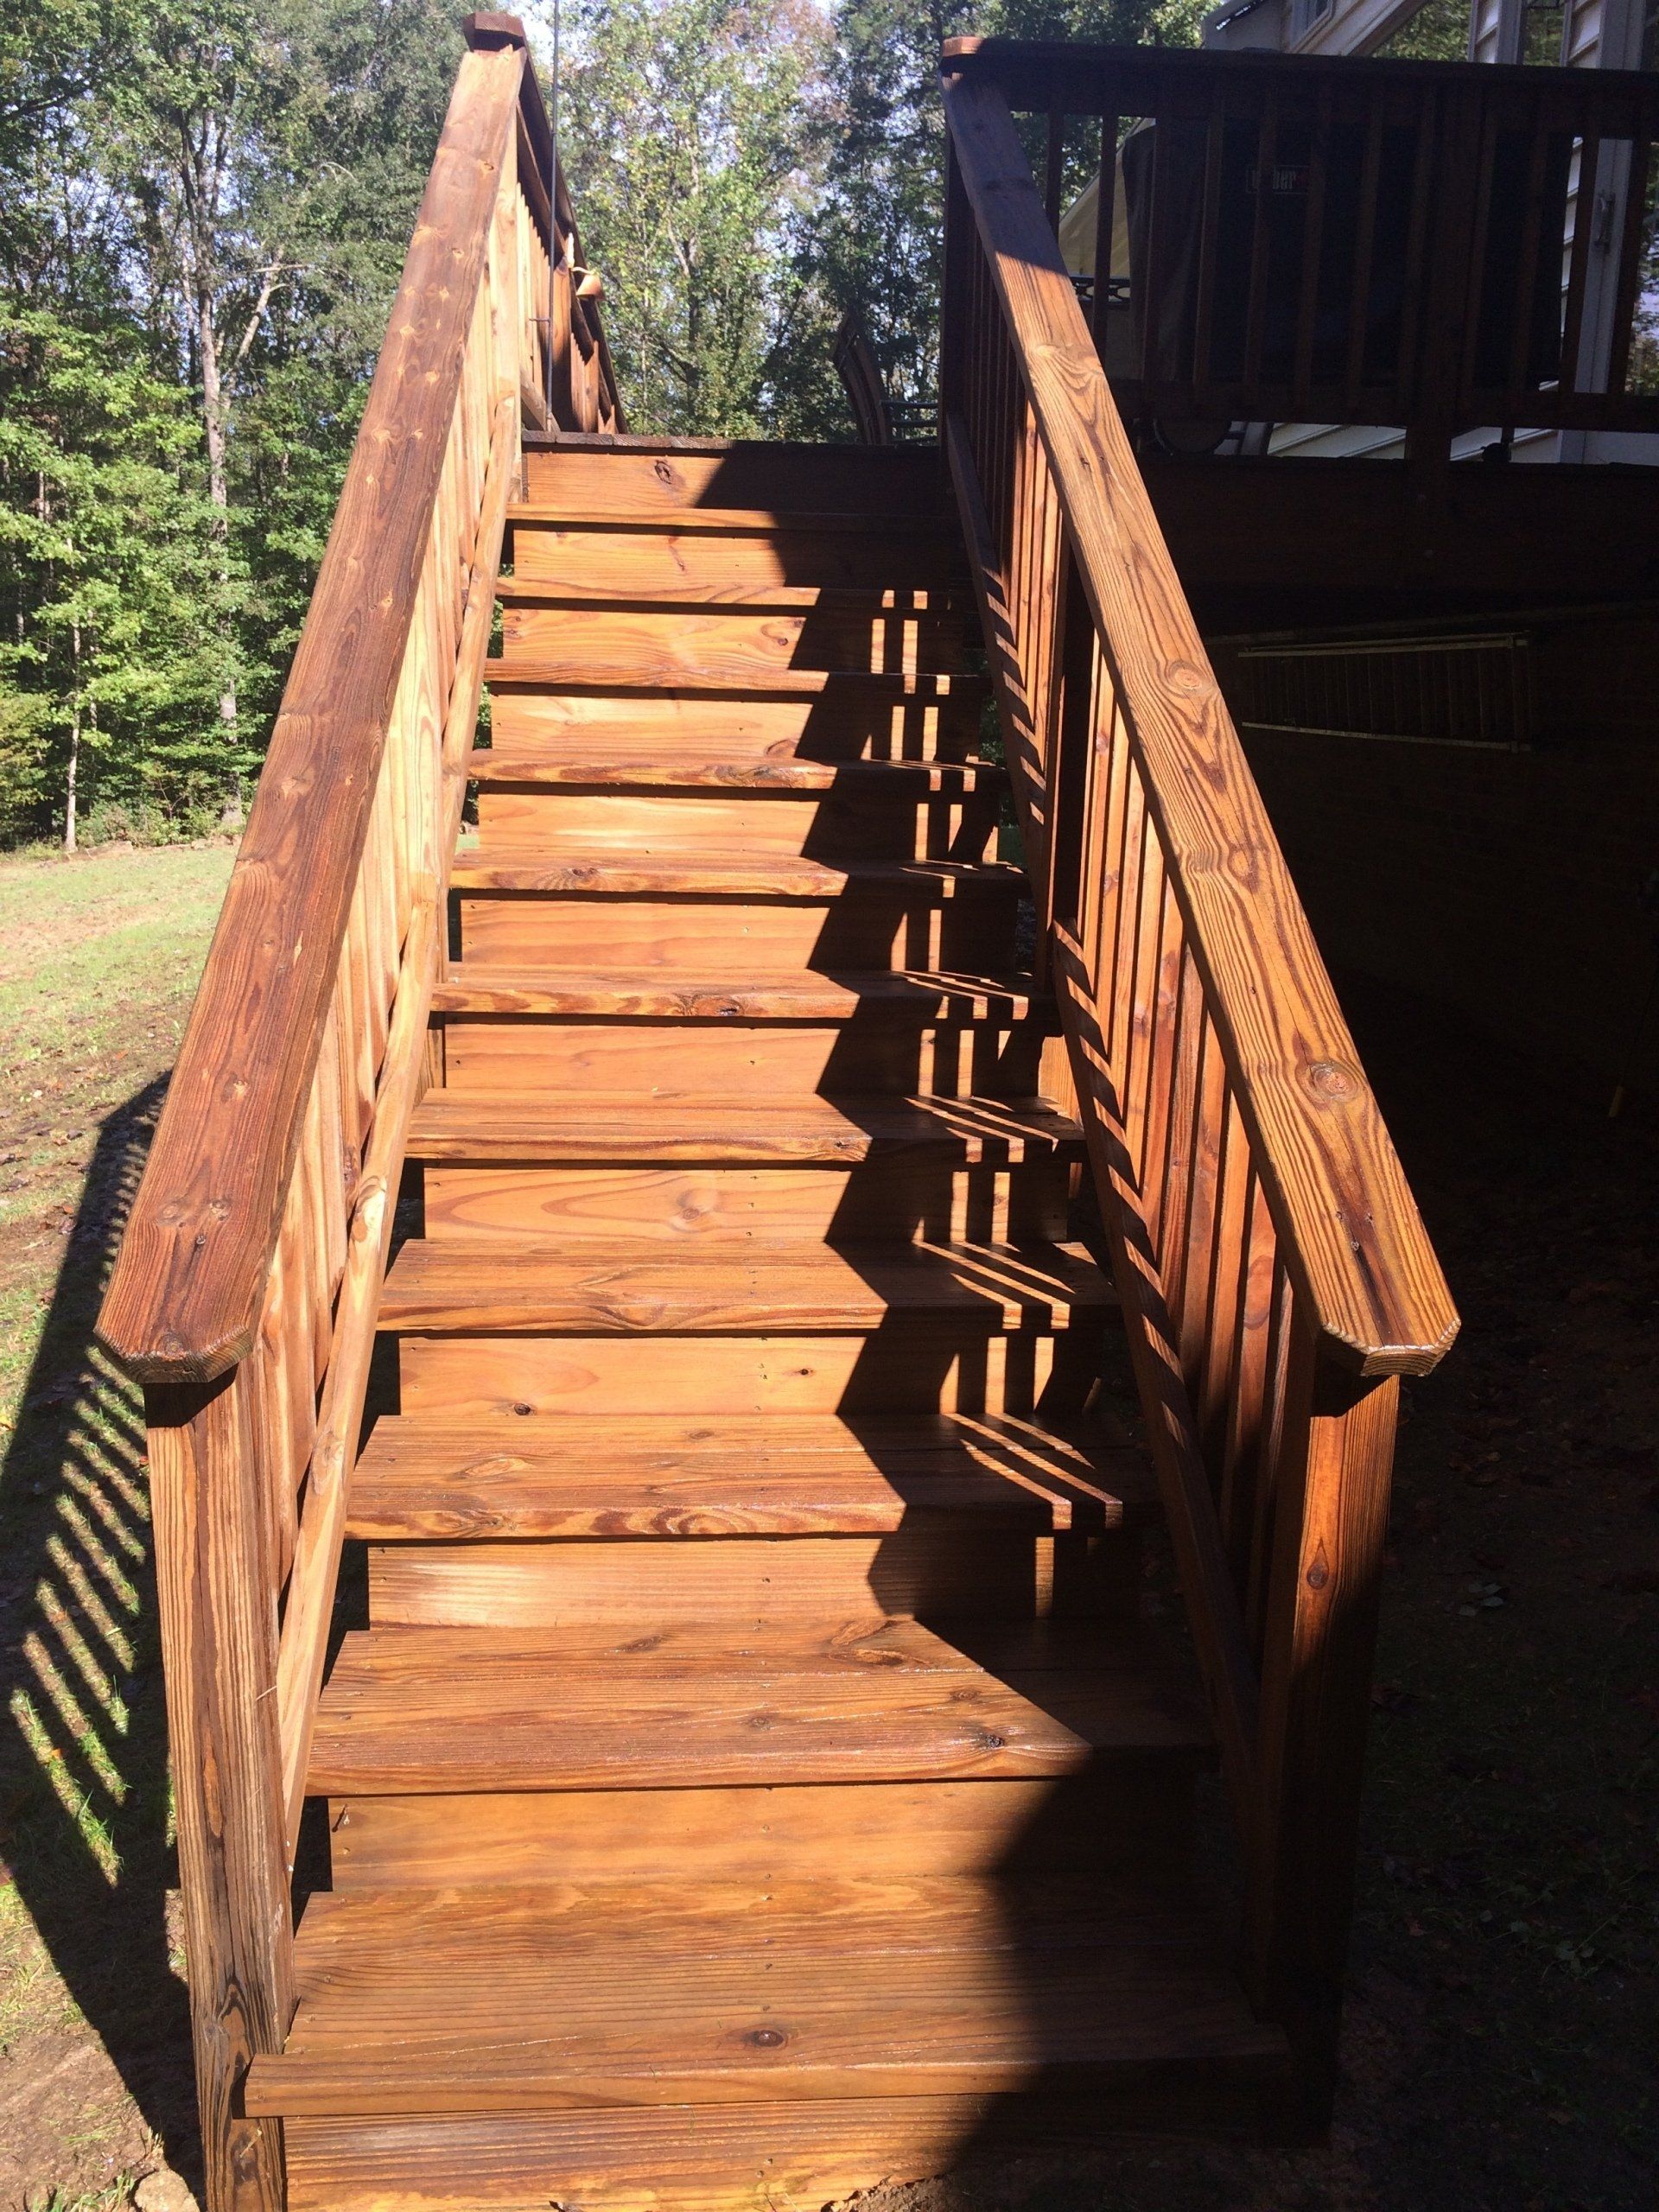 cleaned new look old wood stairs